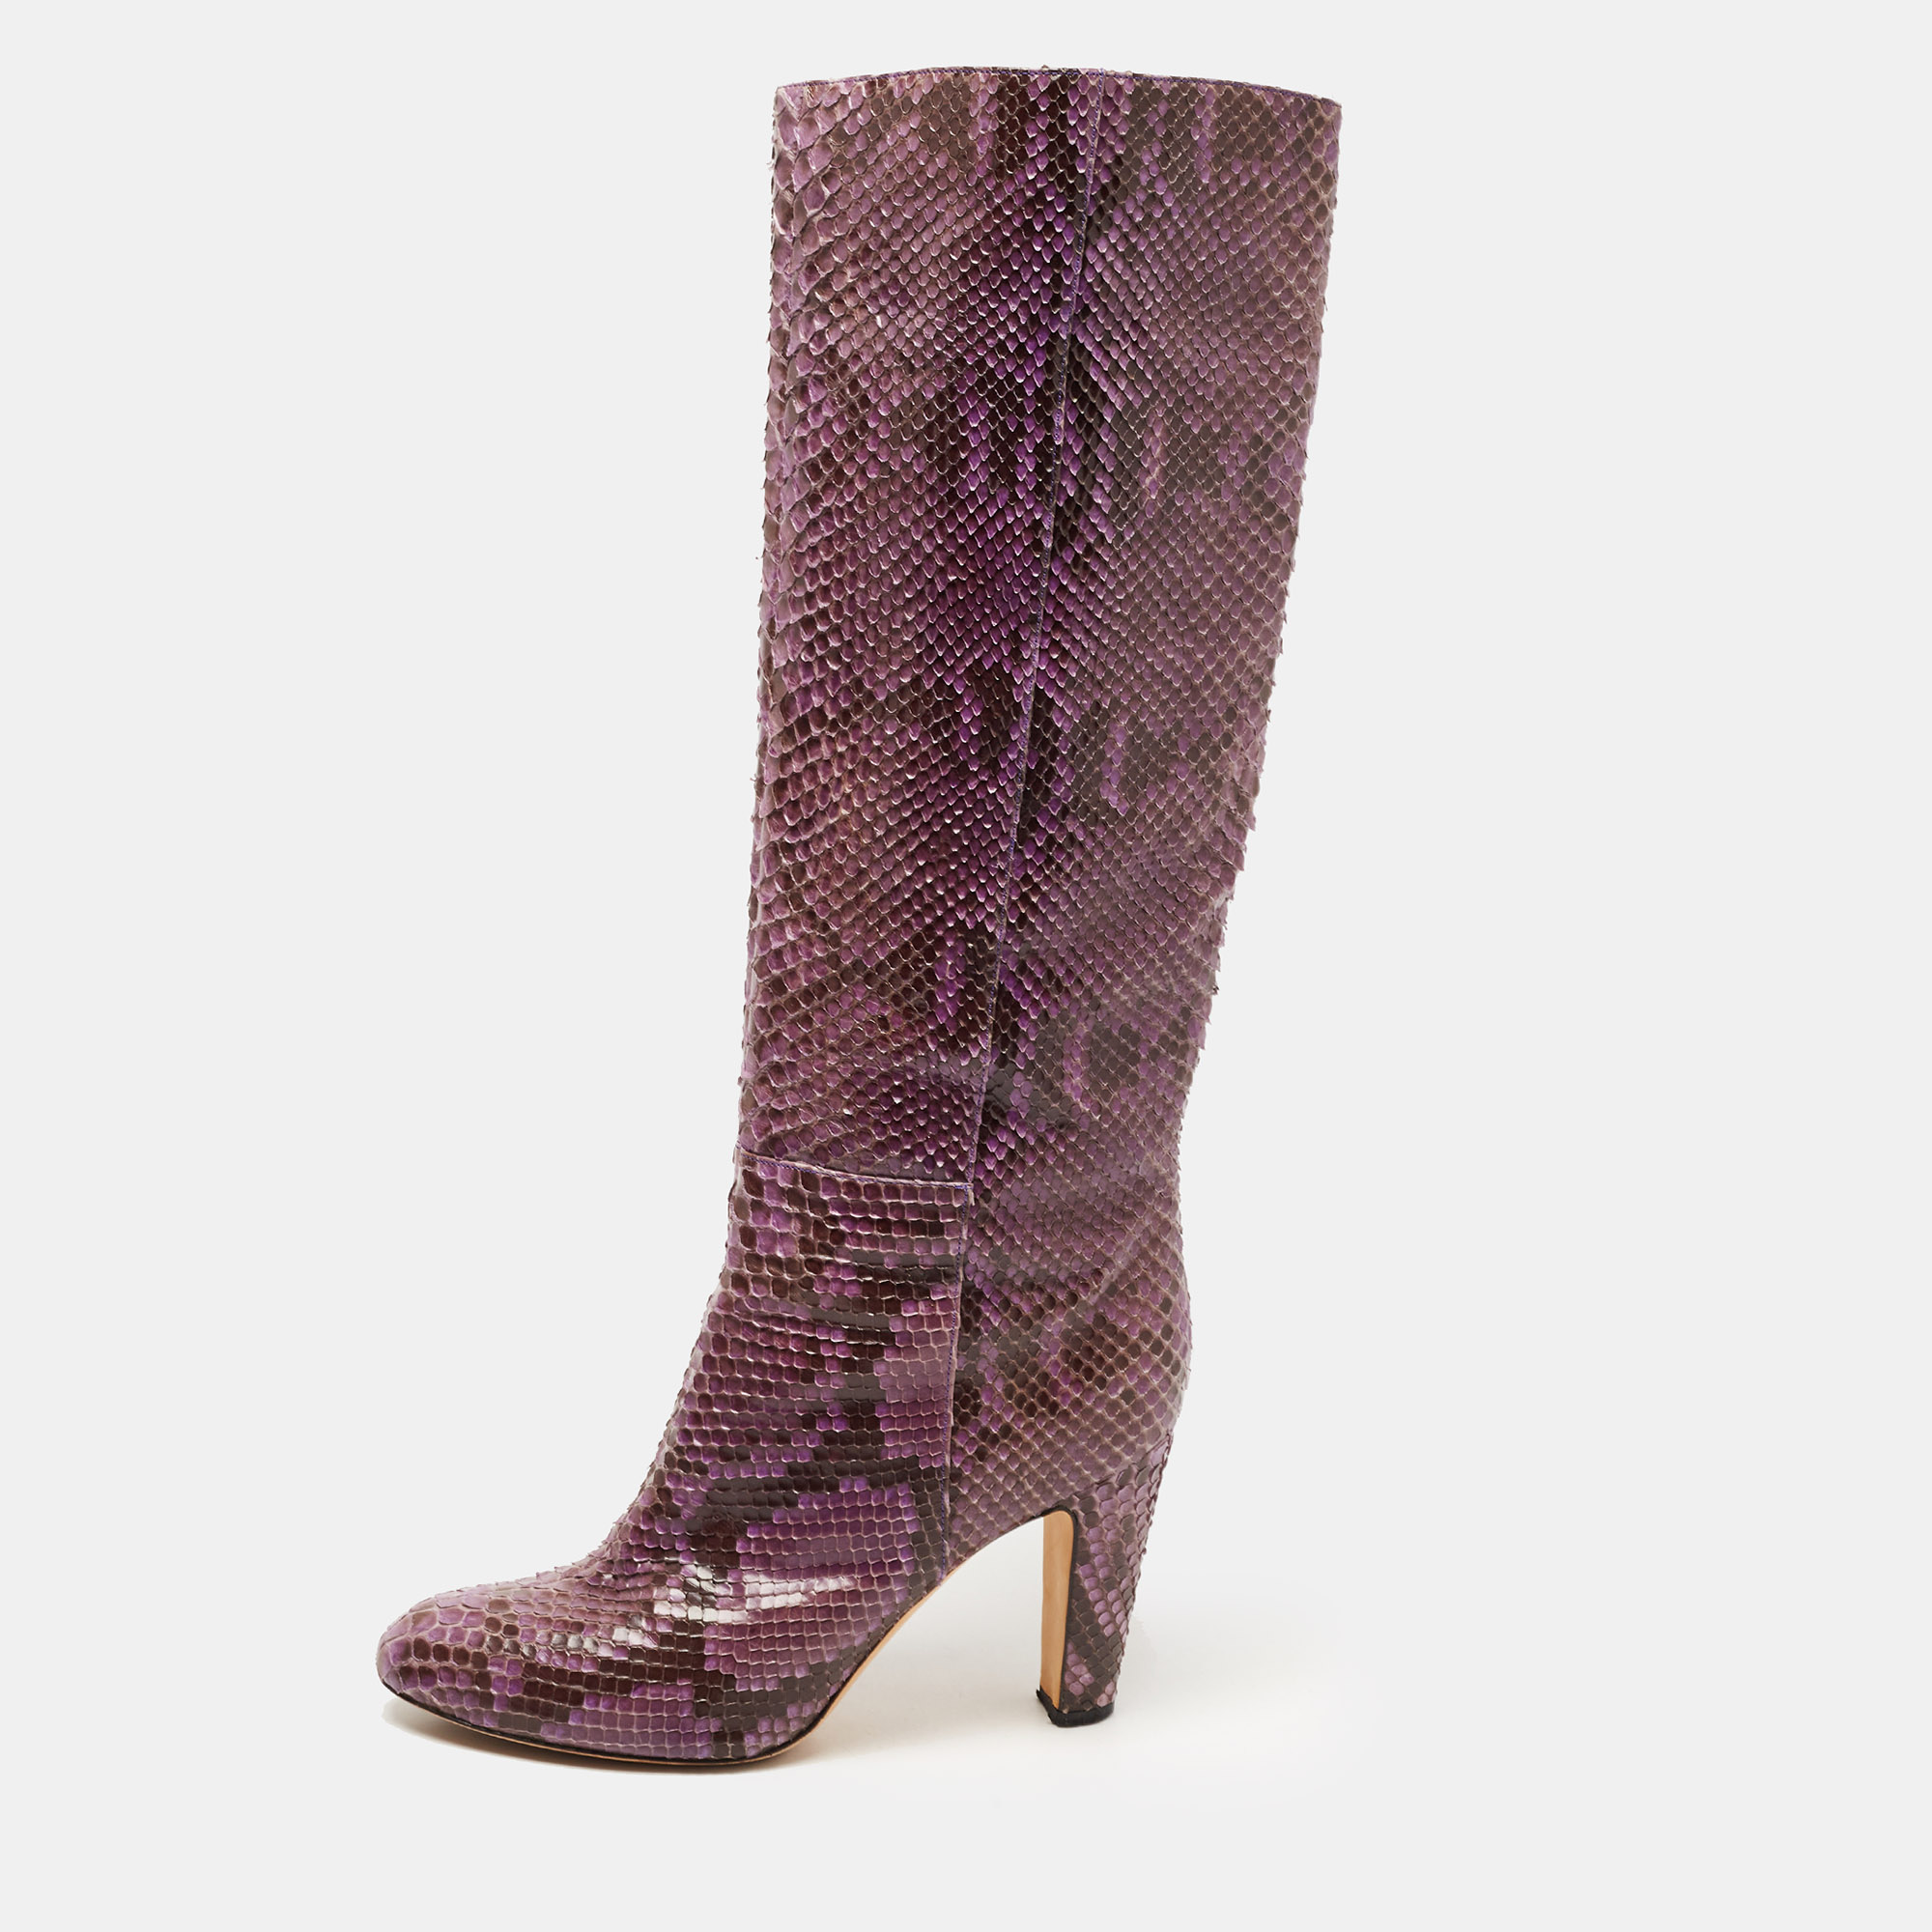 Pre-owned Sergio Rossi Purple Python Knee Length Boots Size 41